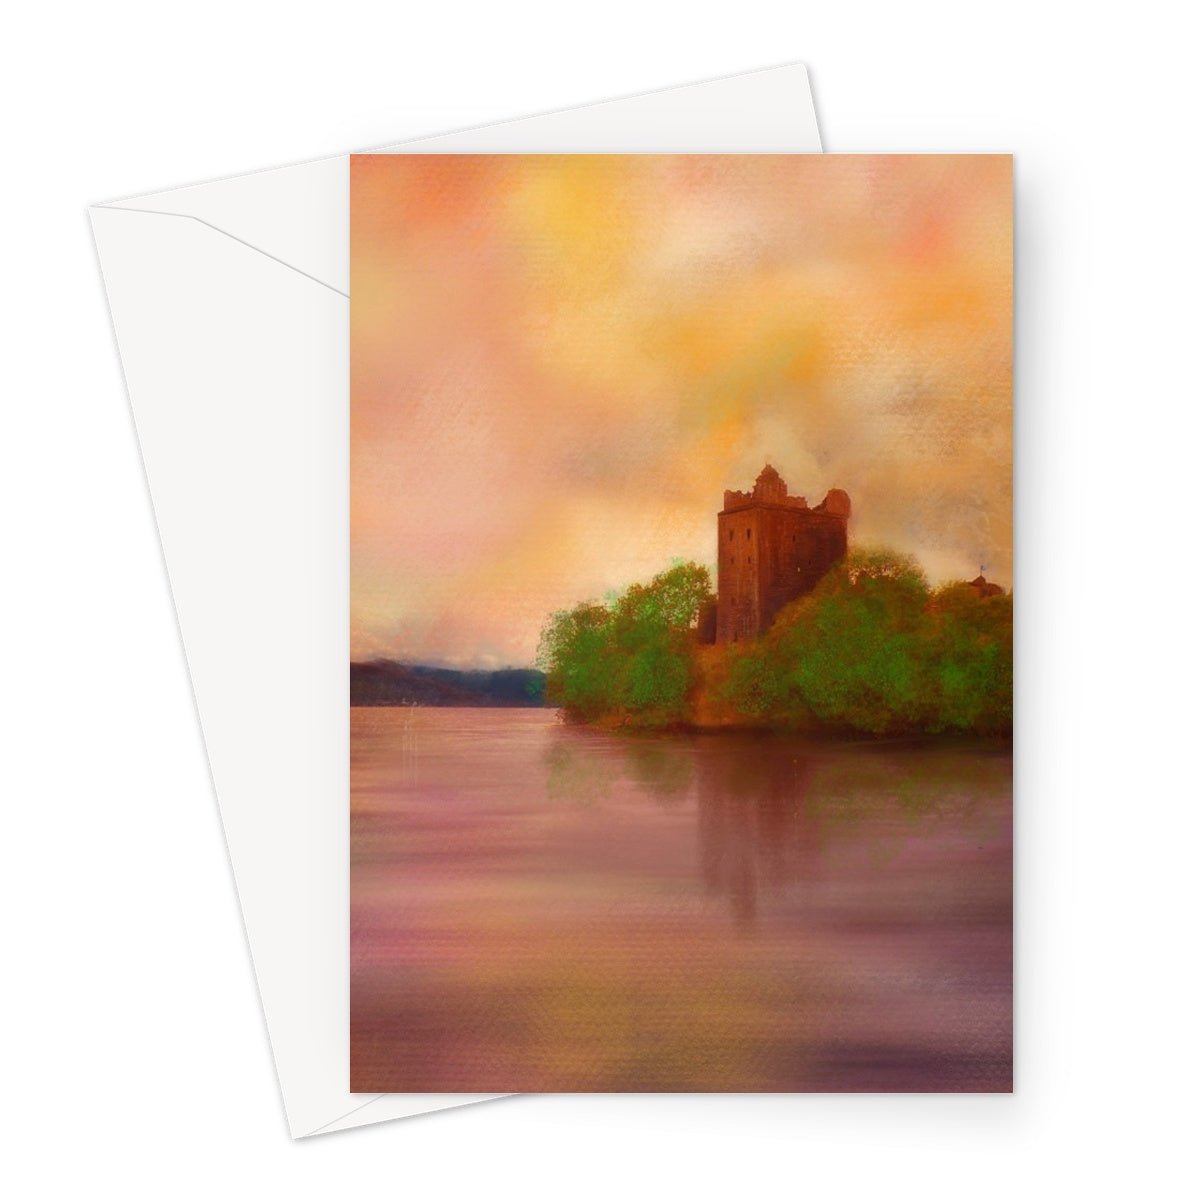 Urquhart Castle Art Gifts Greeting Card-Greetings Cards-Scottish Castles Art Gallery-A5 Portrait-10 Cards-Paintings, Prints, Homeware, Art Gifts From Scotland By Scottish Artist Kevin Hunter